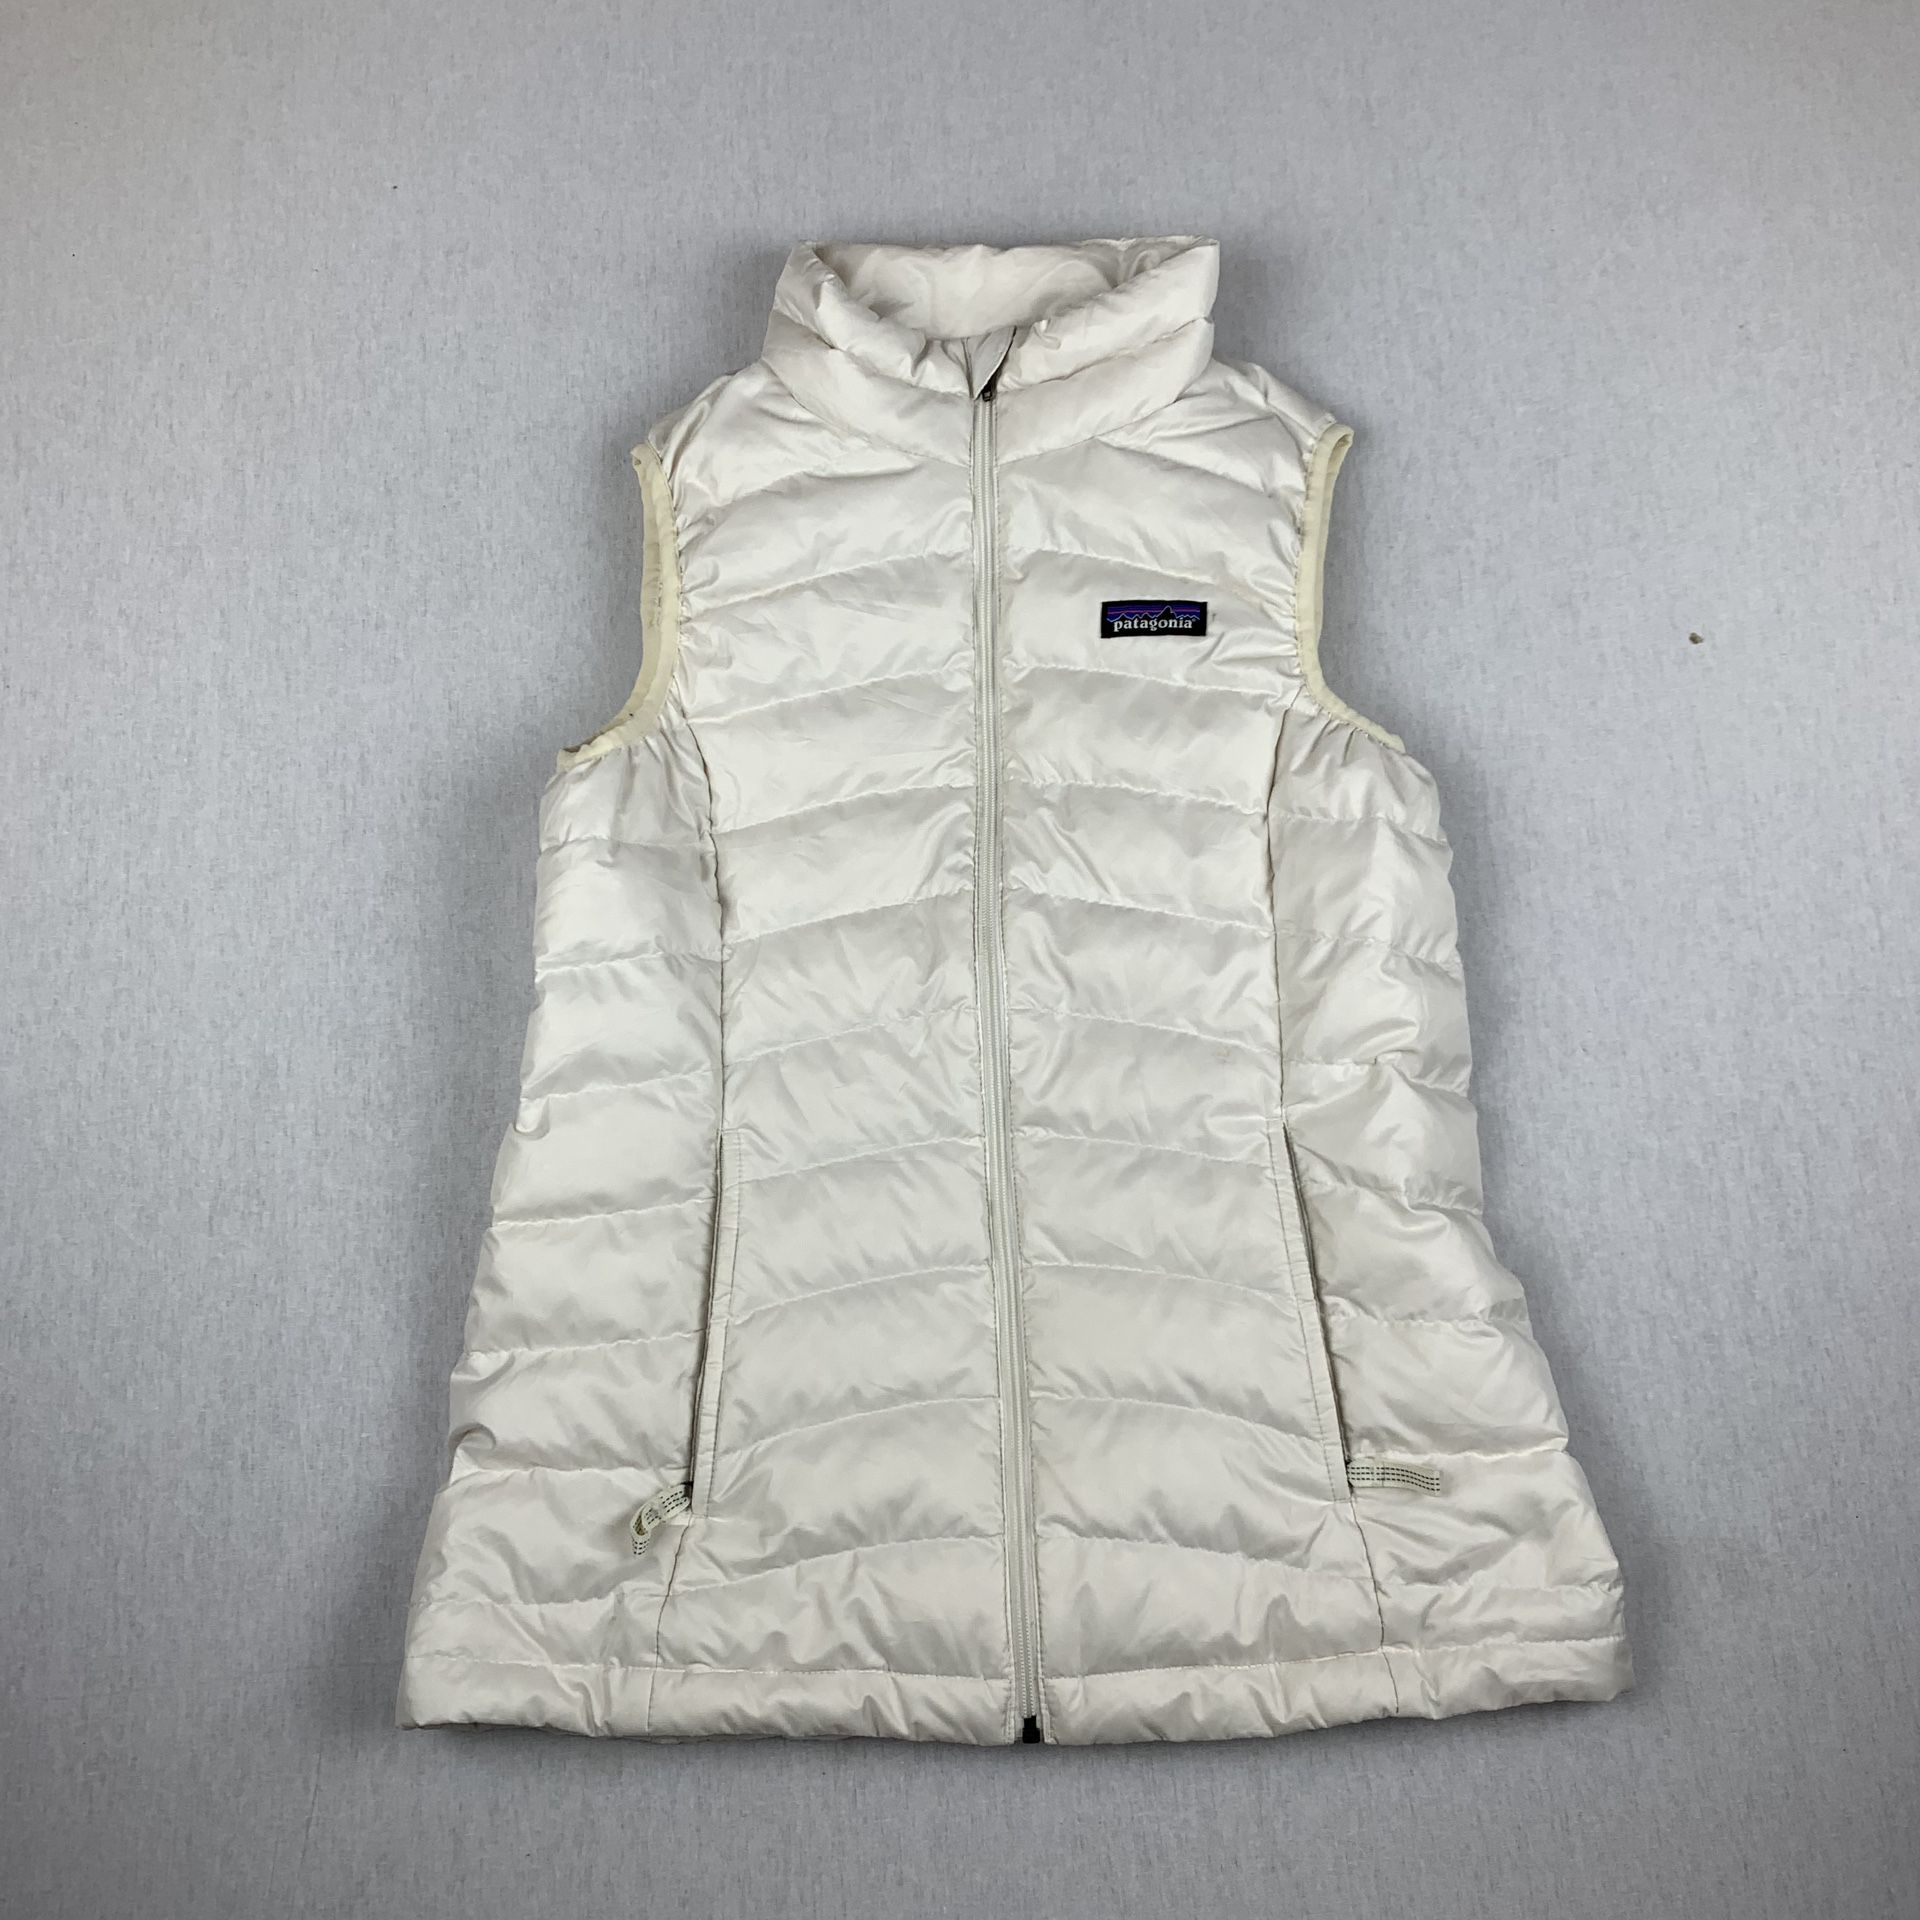 Patagonia Kids Down Sweater White Puffer Full Zip Vest Size Youth Large 12